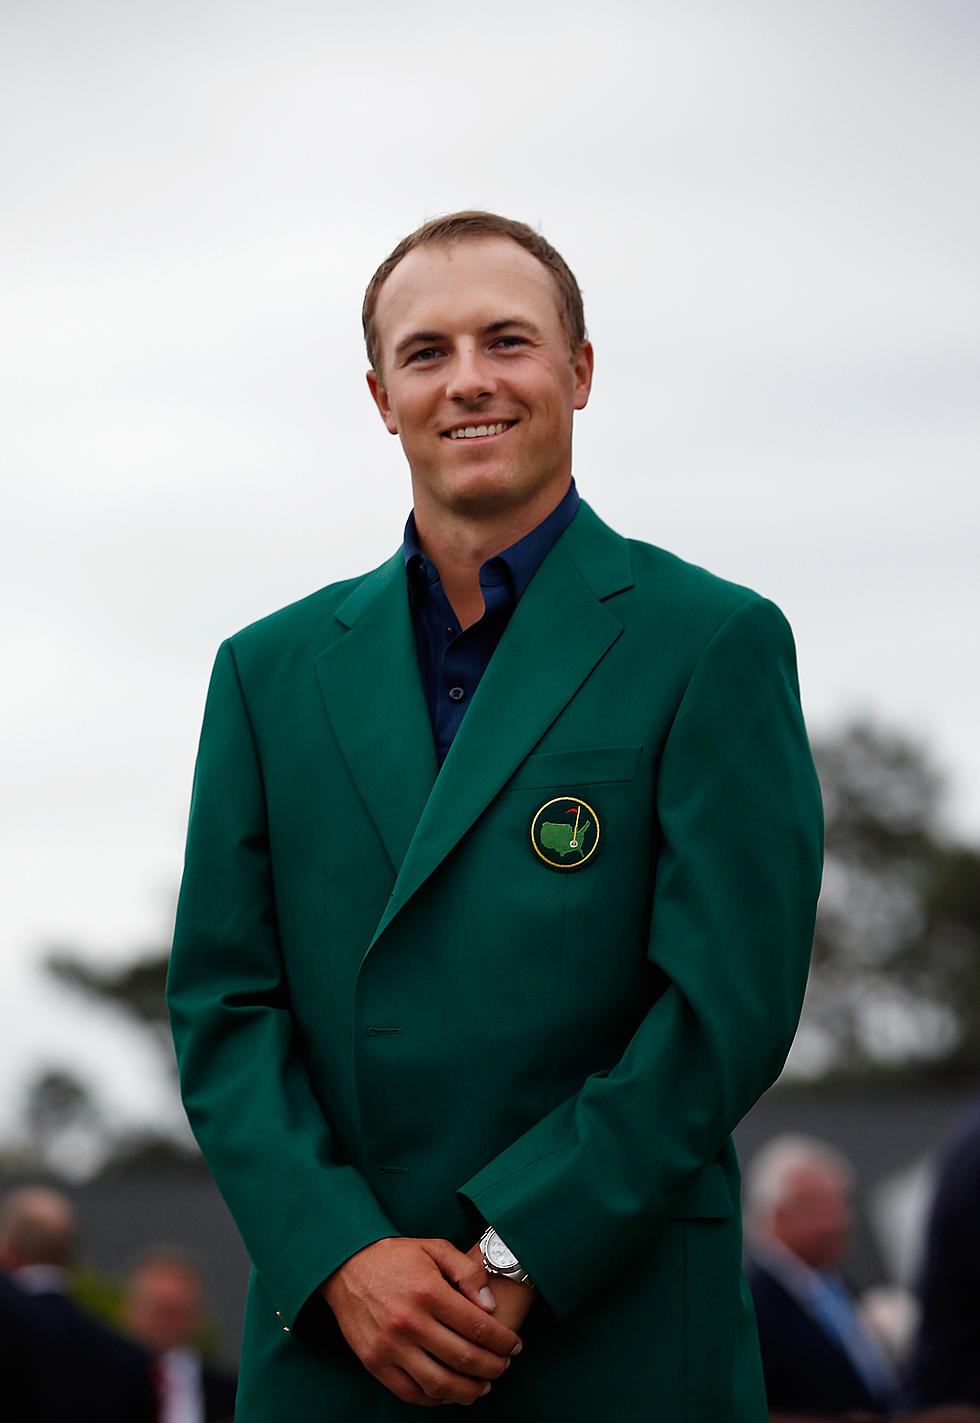 Jordan Spieth Is Going To Take The Golf World By Storm